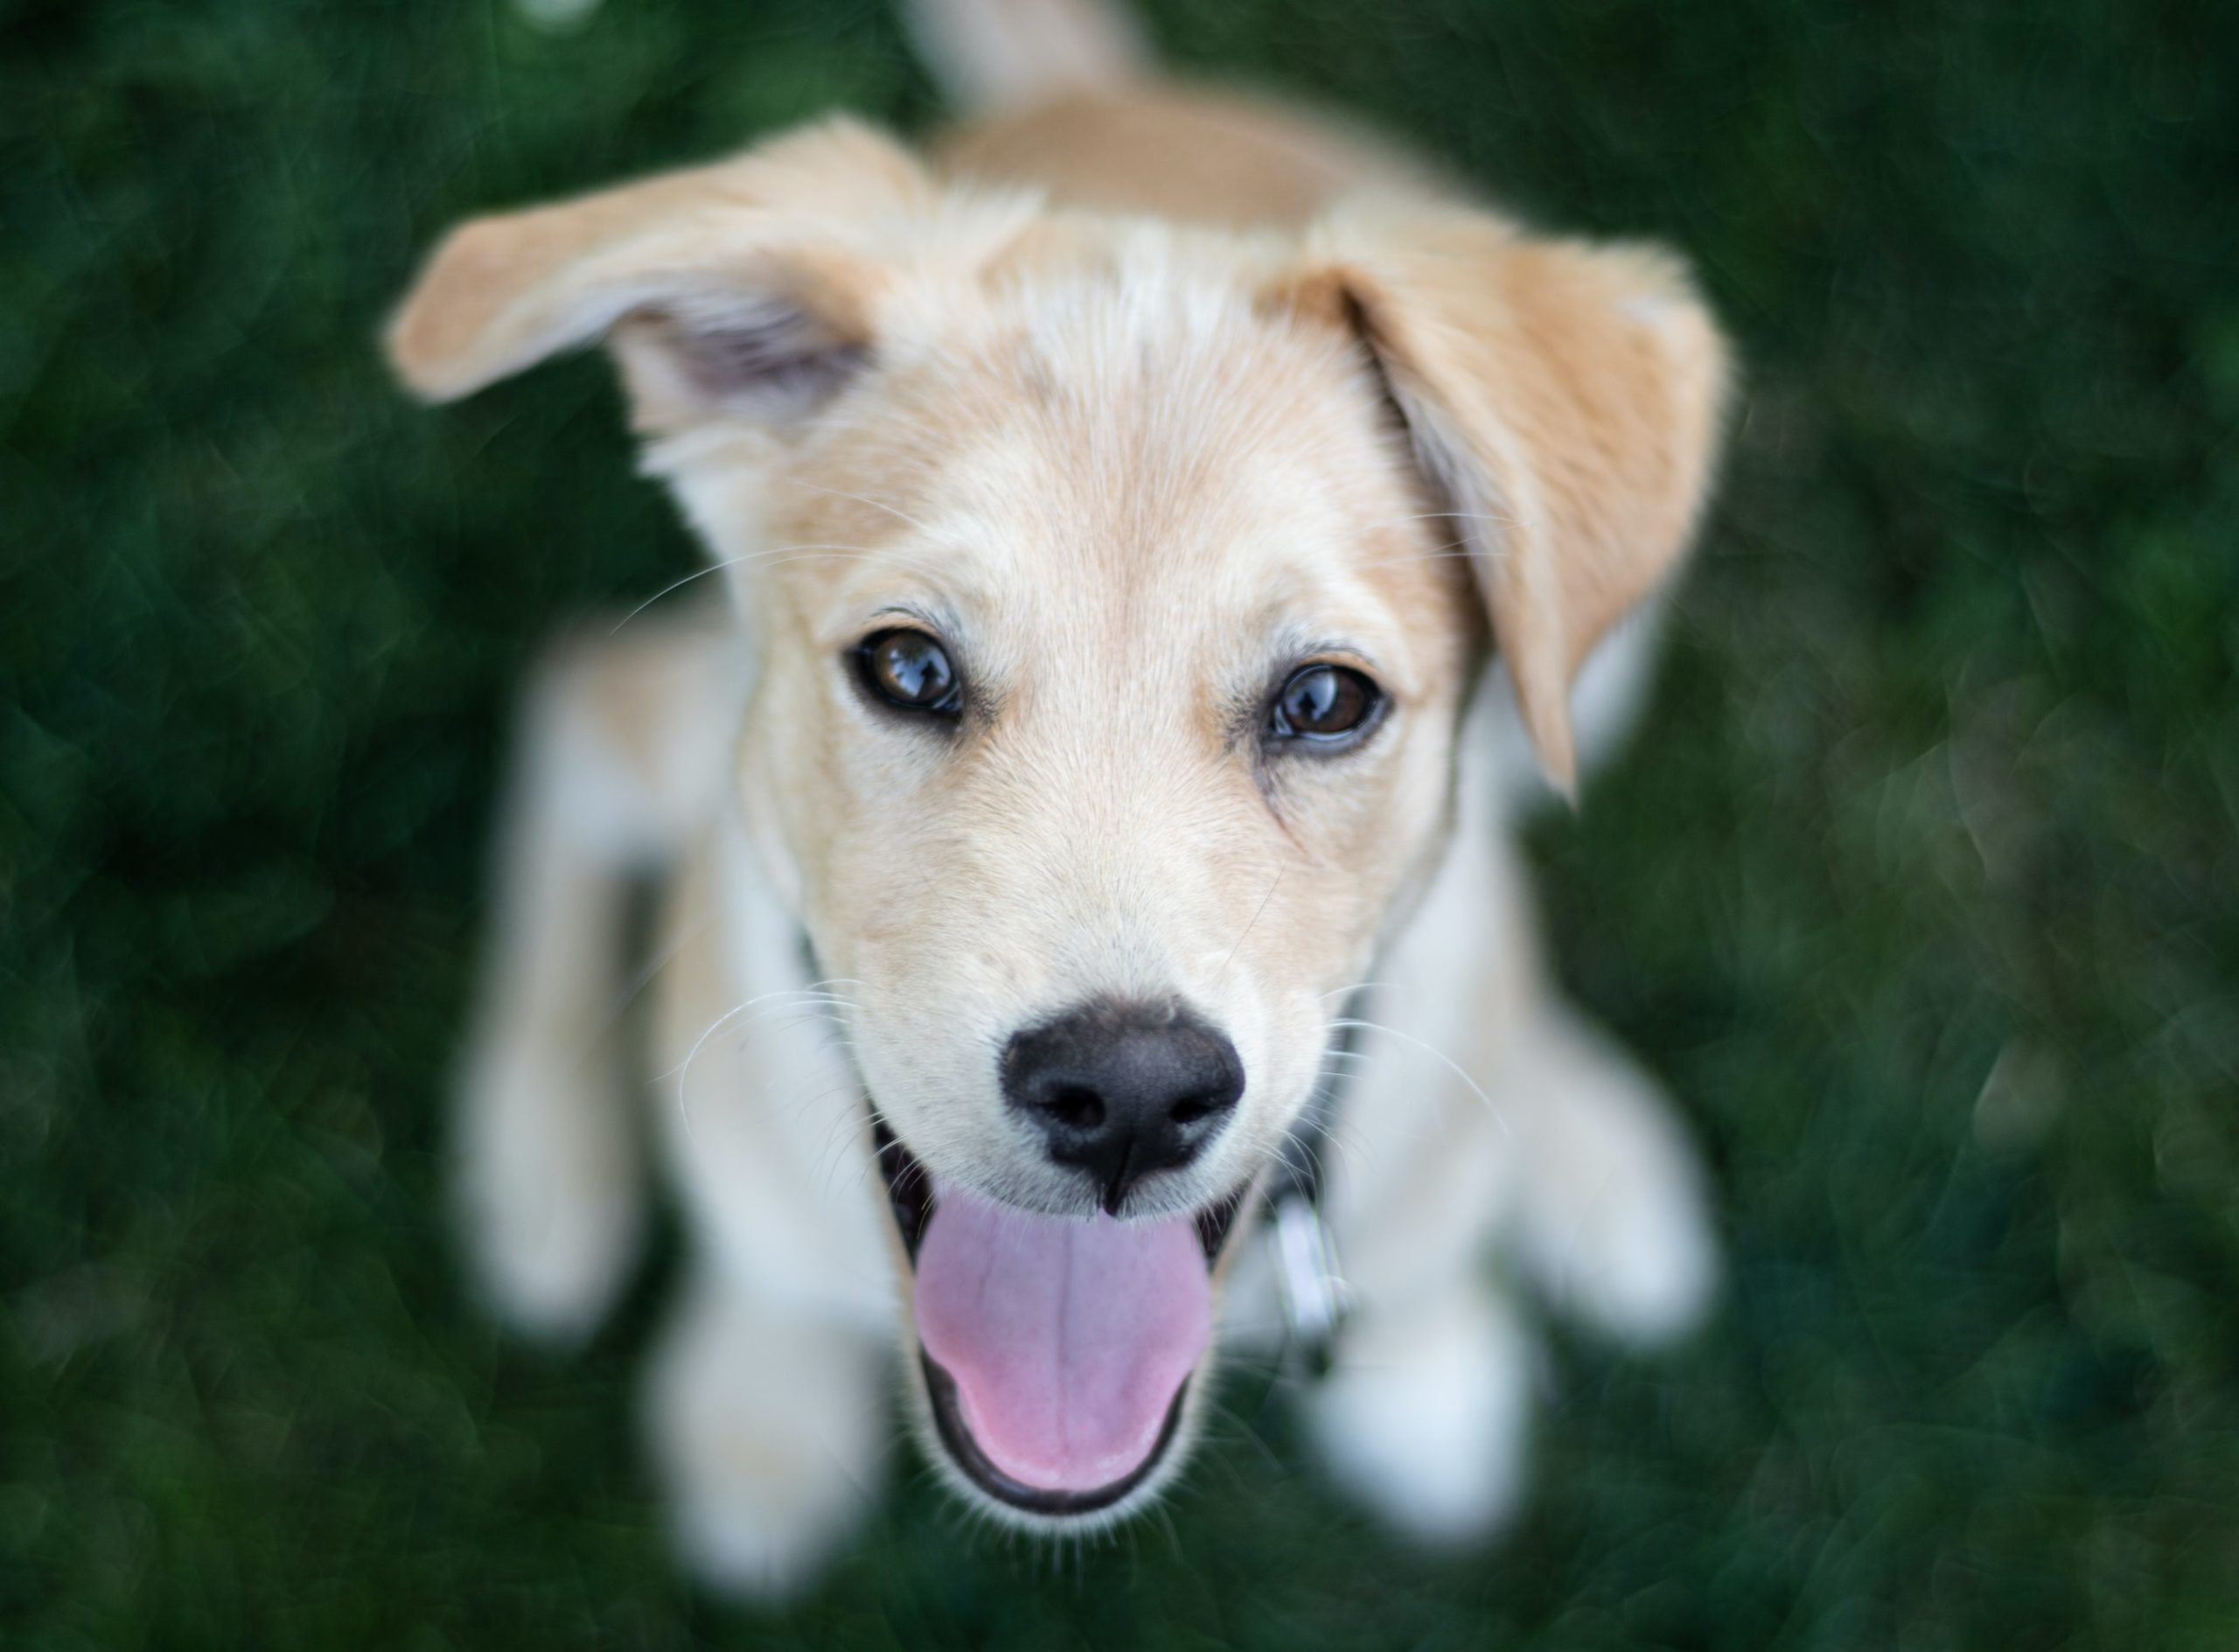 Why positive dog training is better